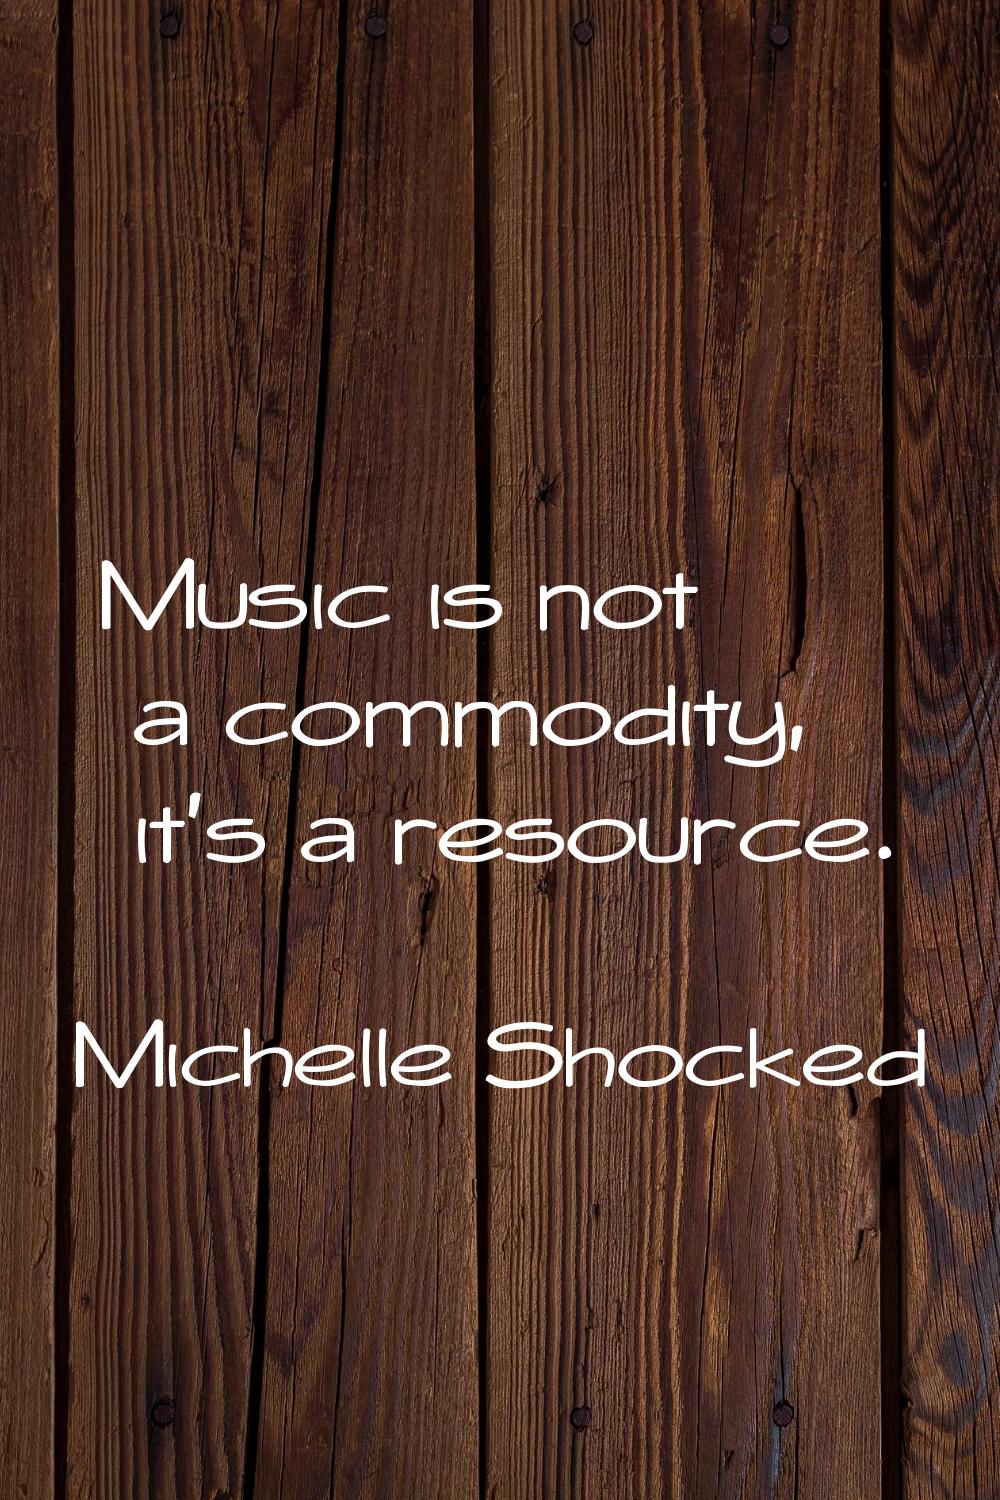 Music is not a commodity, it's a resource.